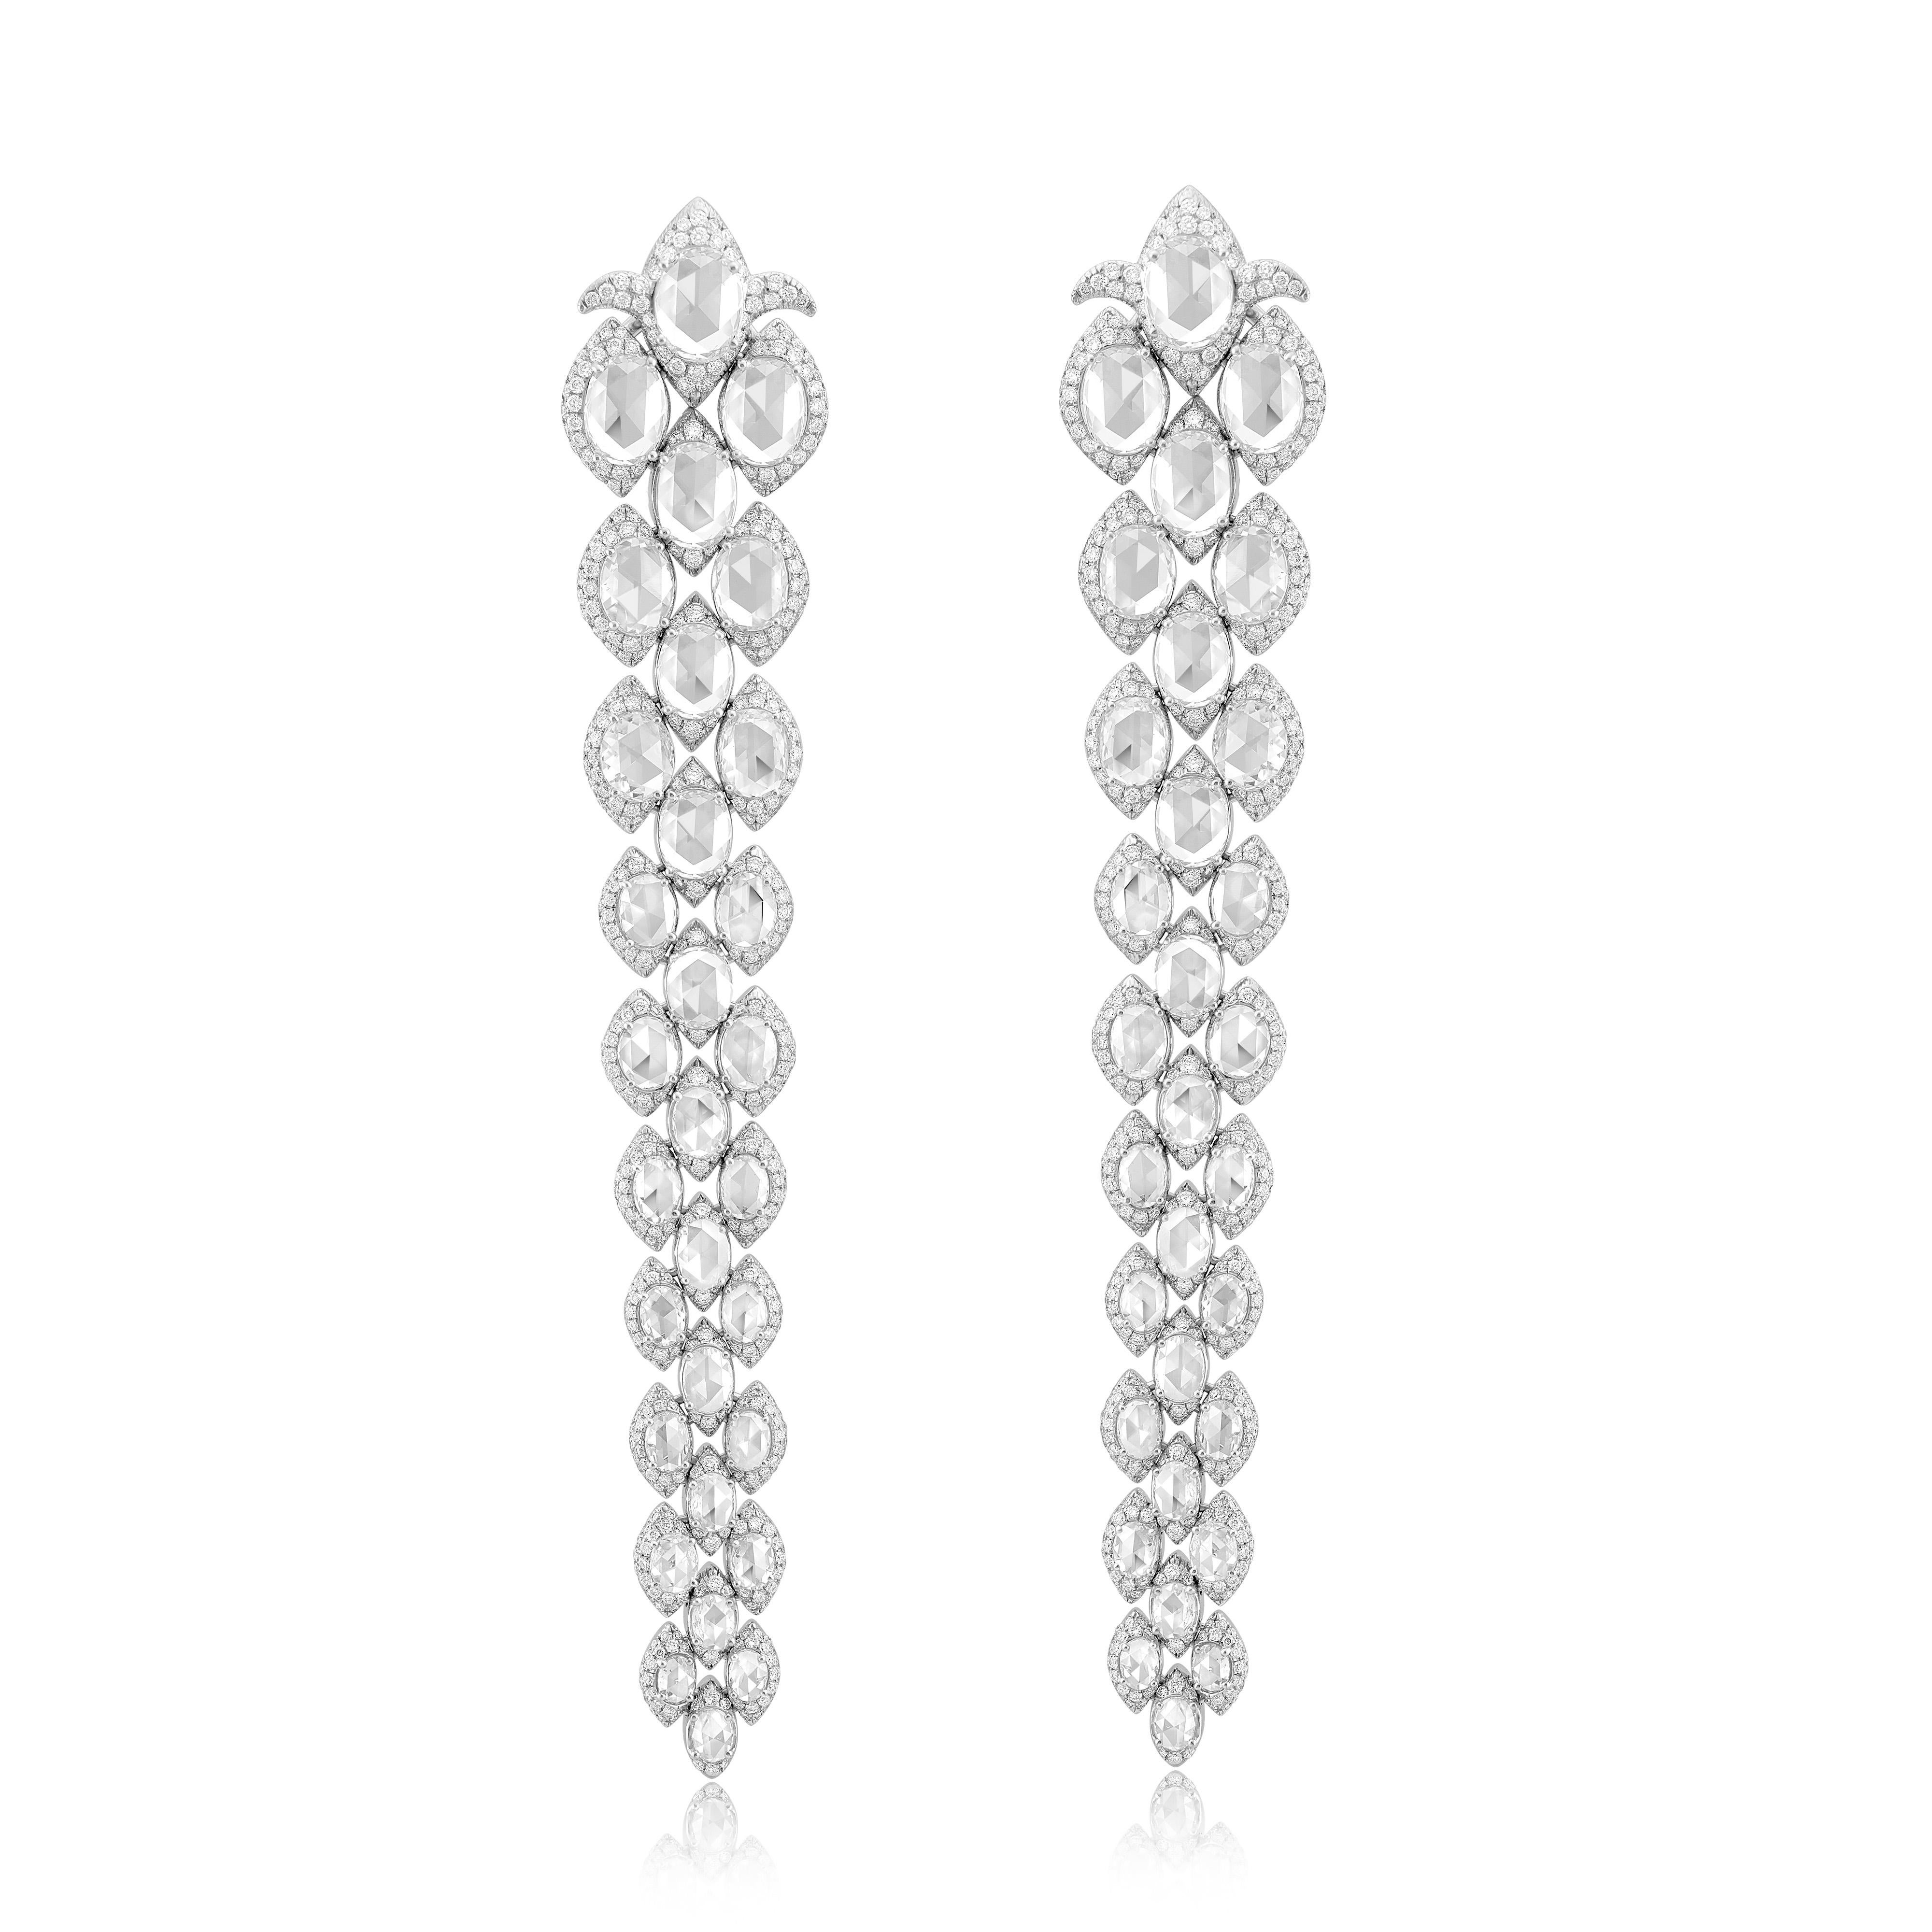 These statement earrings are crafted with special Rose Cut diamonds (10 - 70 Points each in size) surrounding a round brilliant cut diamonds. Handcrafted from lightly hammered 18-karat gold and traced with 17.2cts of glittering top quality white